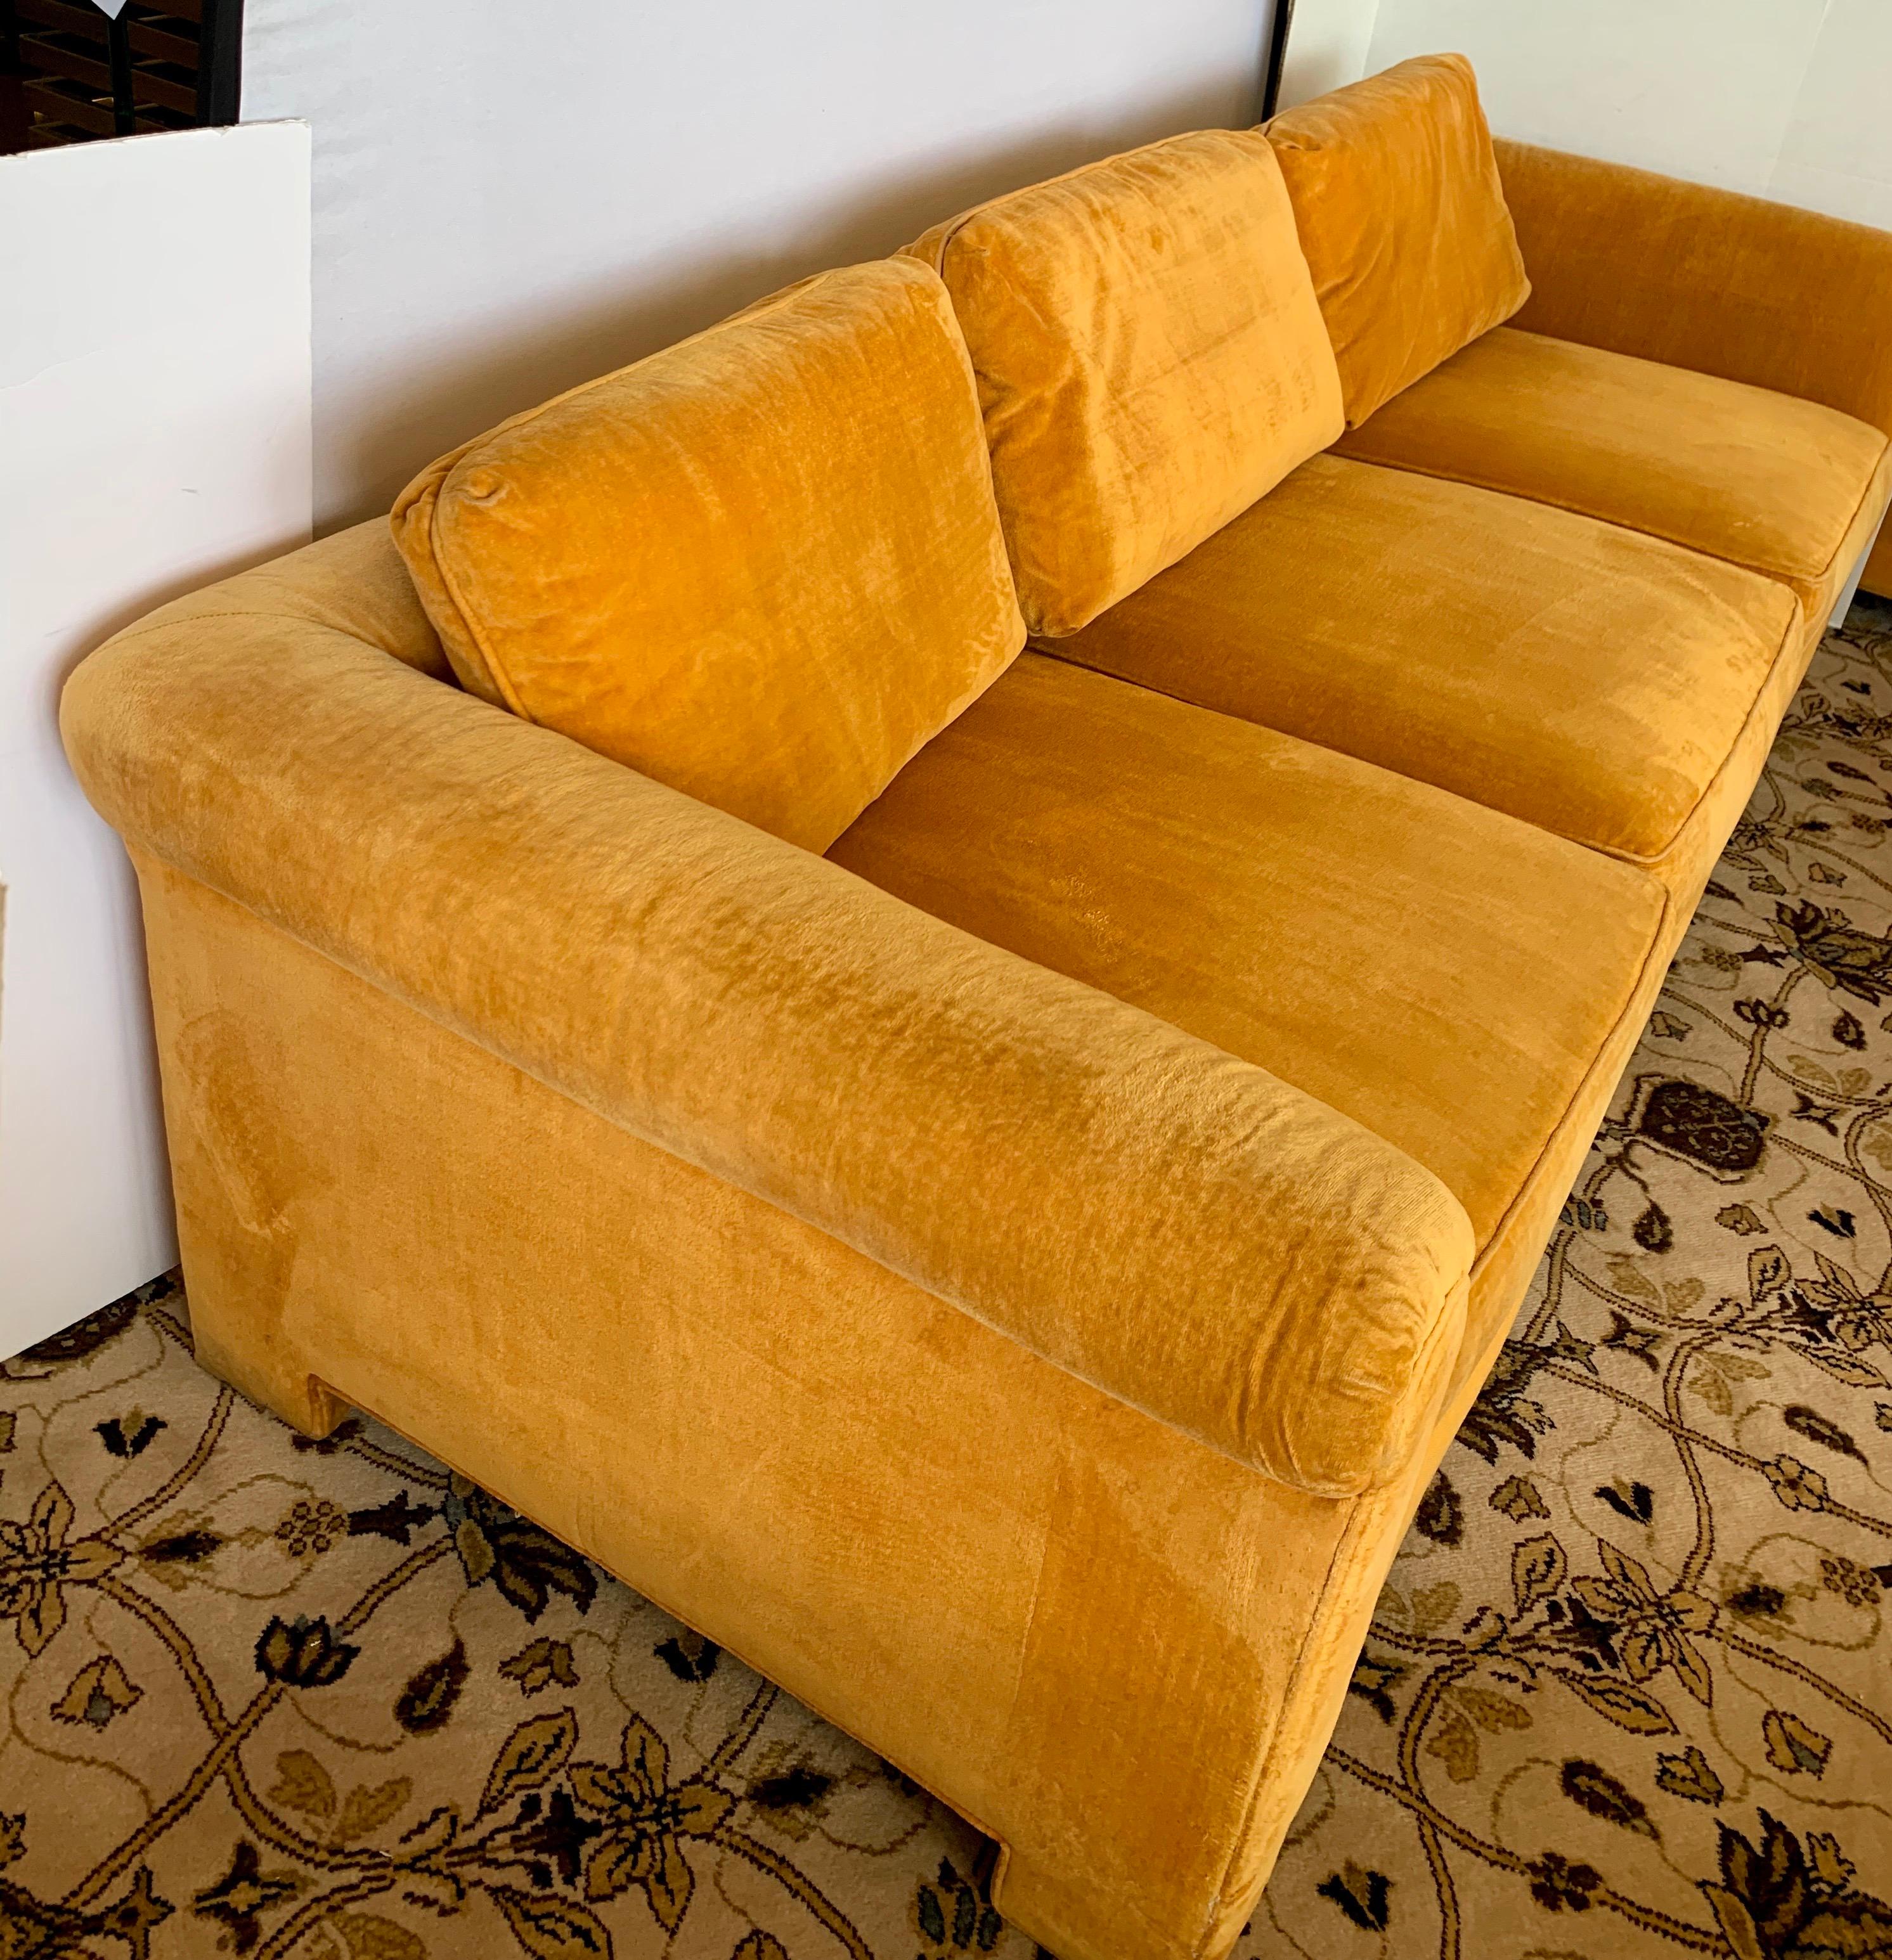 Rare and coveted signed Century Furniture sofa with original Hermès orange colored velvet fabric.
The fabric is original and still in decent condition with normal age appropriate wear. The seats sit a little on the less firm side and the sofa is low